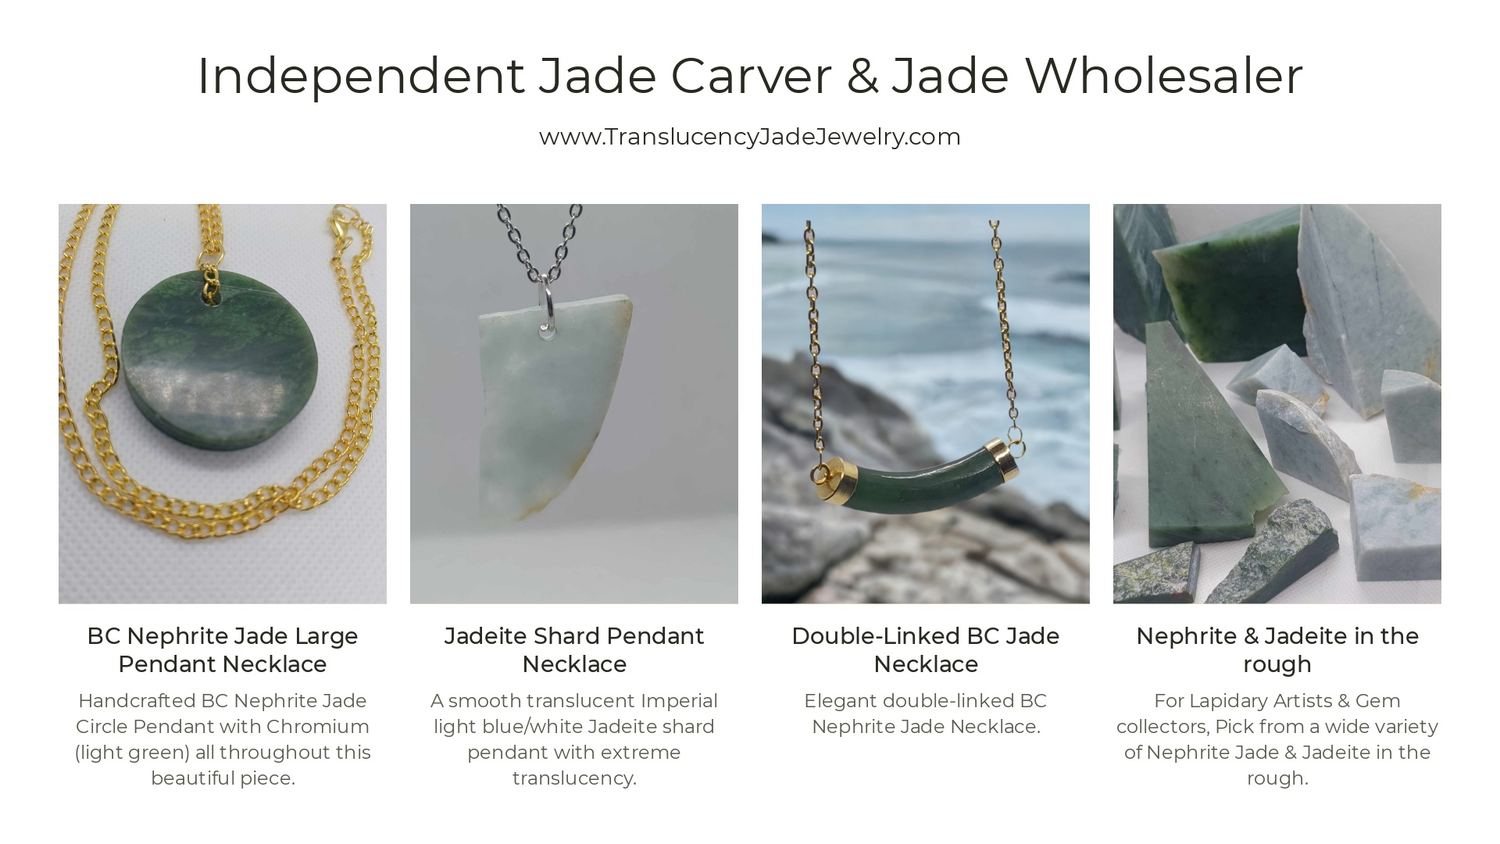 All Products - Jade Jewelry, Rough-Jade, Specimens